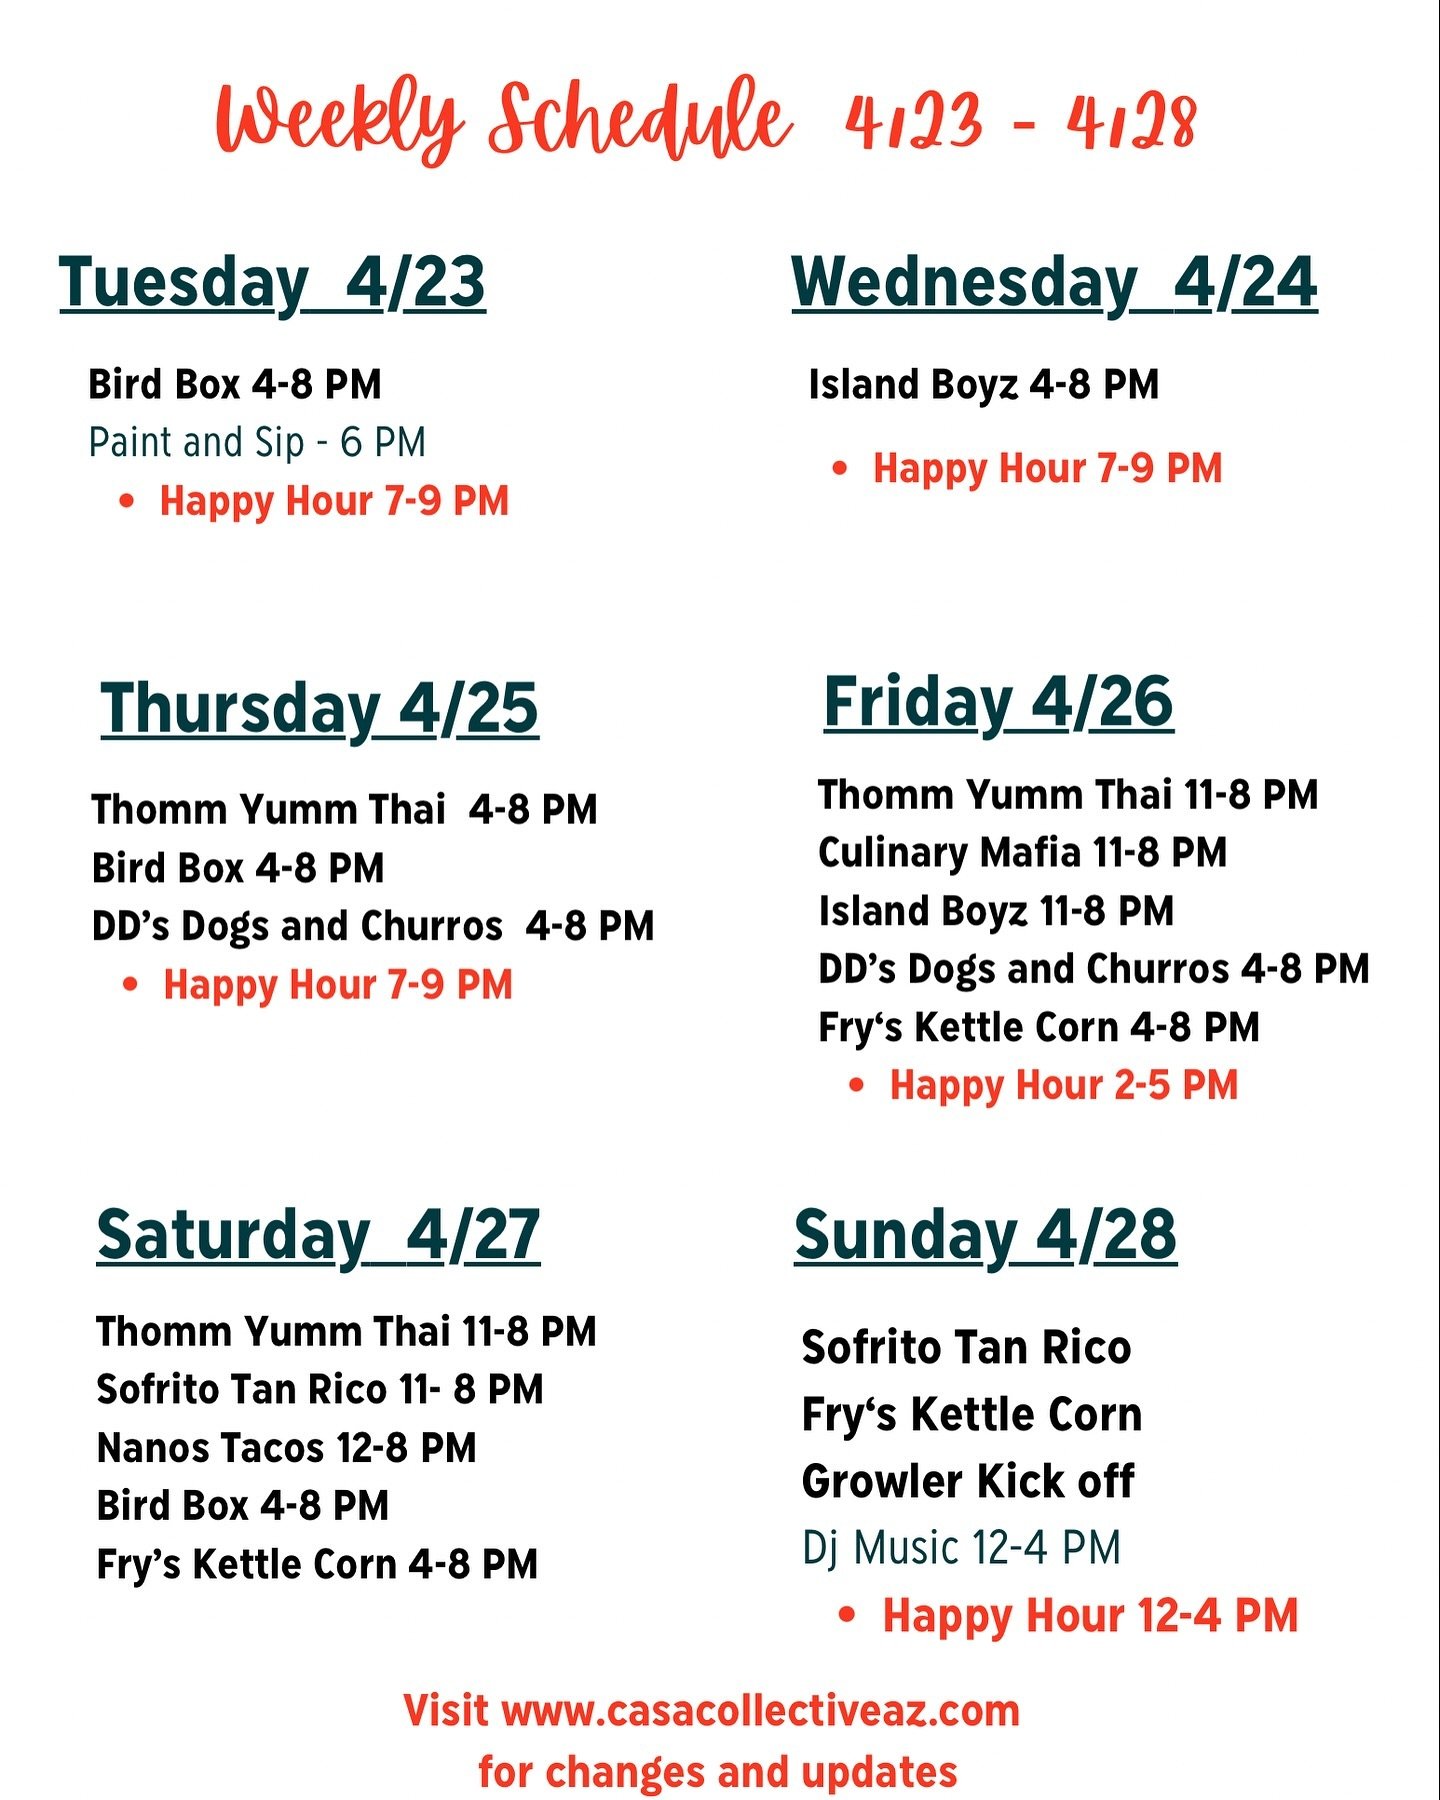 This weeks schedule! Watch for details for the growler kickoff. Have a great week.